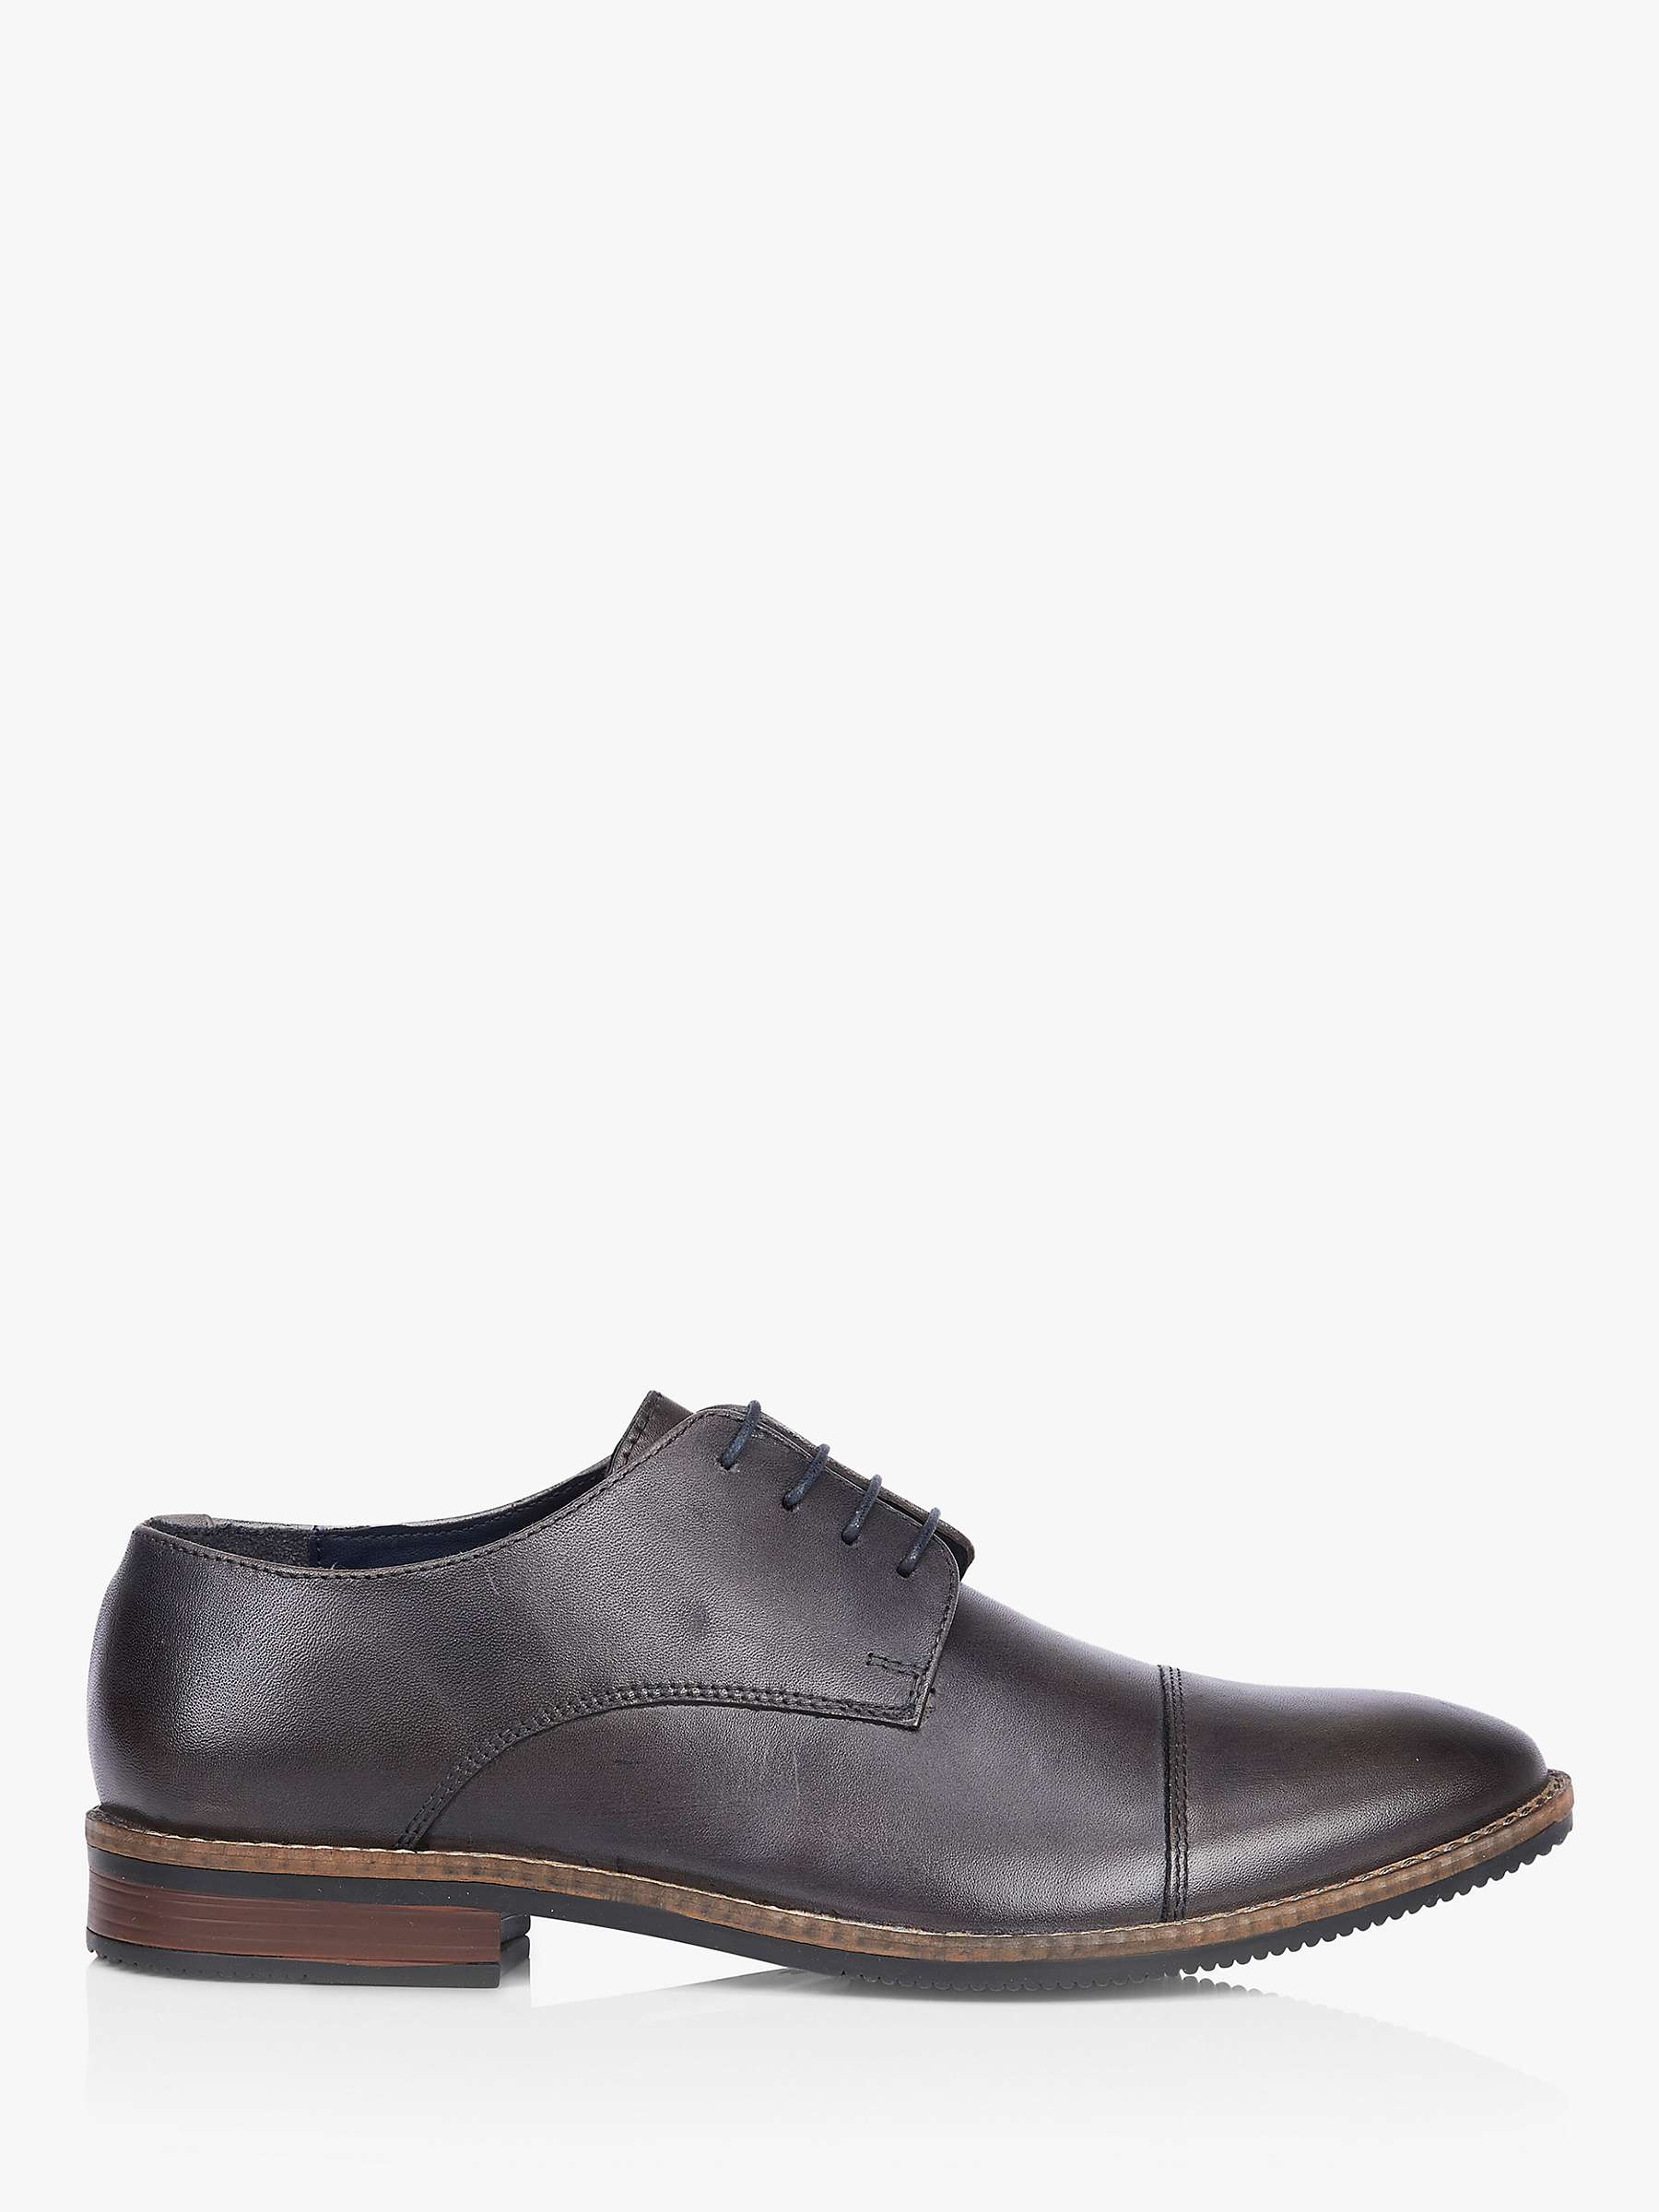 Buy Silver Street London Rufus Derby Shoes Online at johnlewis.com